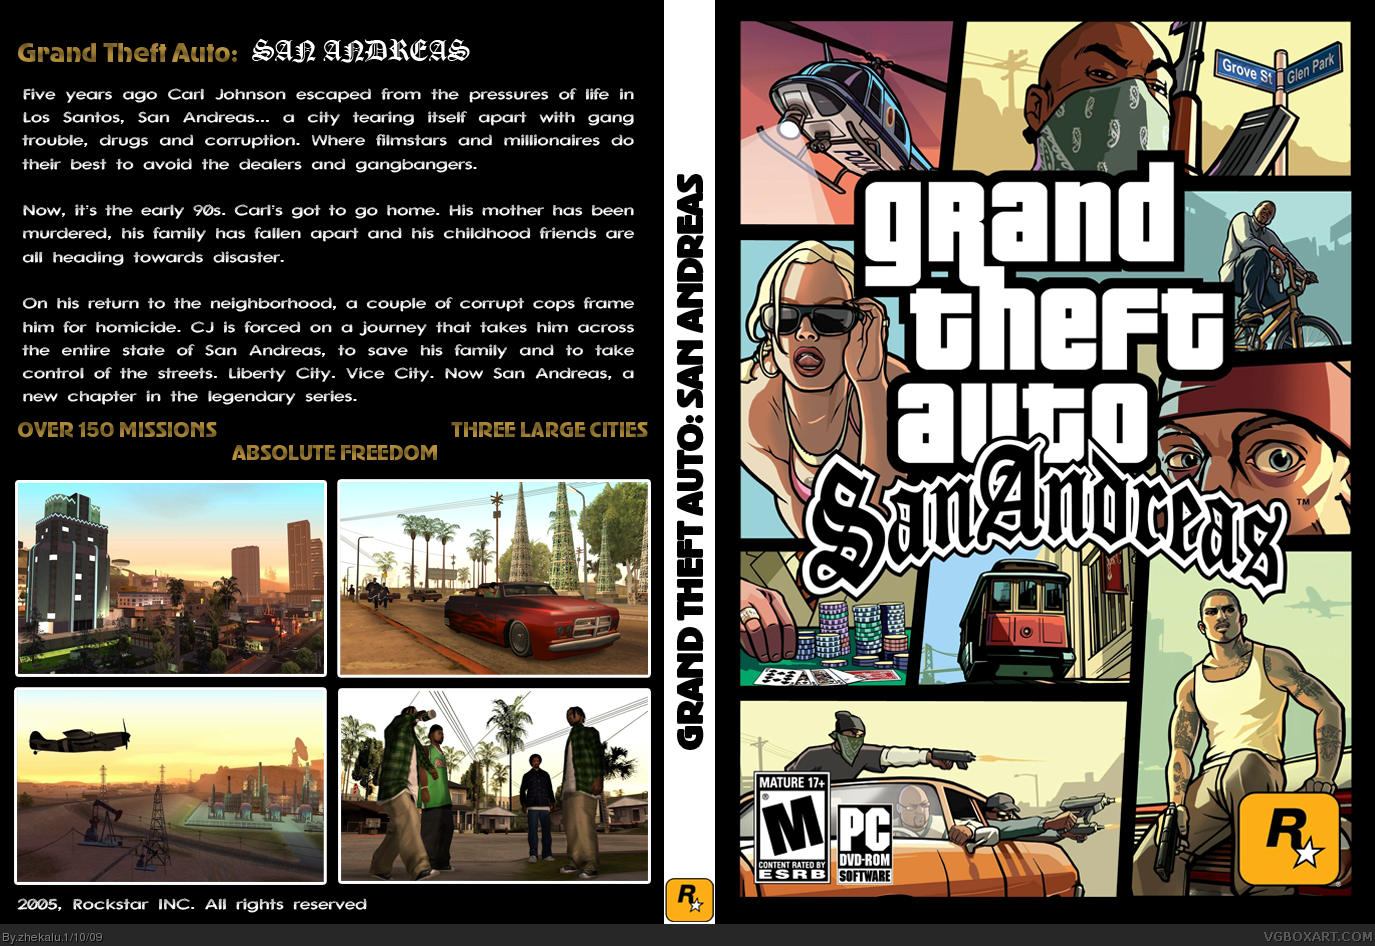 Download Free Game PC GTA San Andreas Extreame Indonesia V56